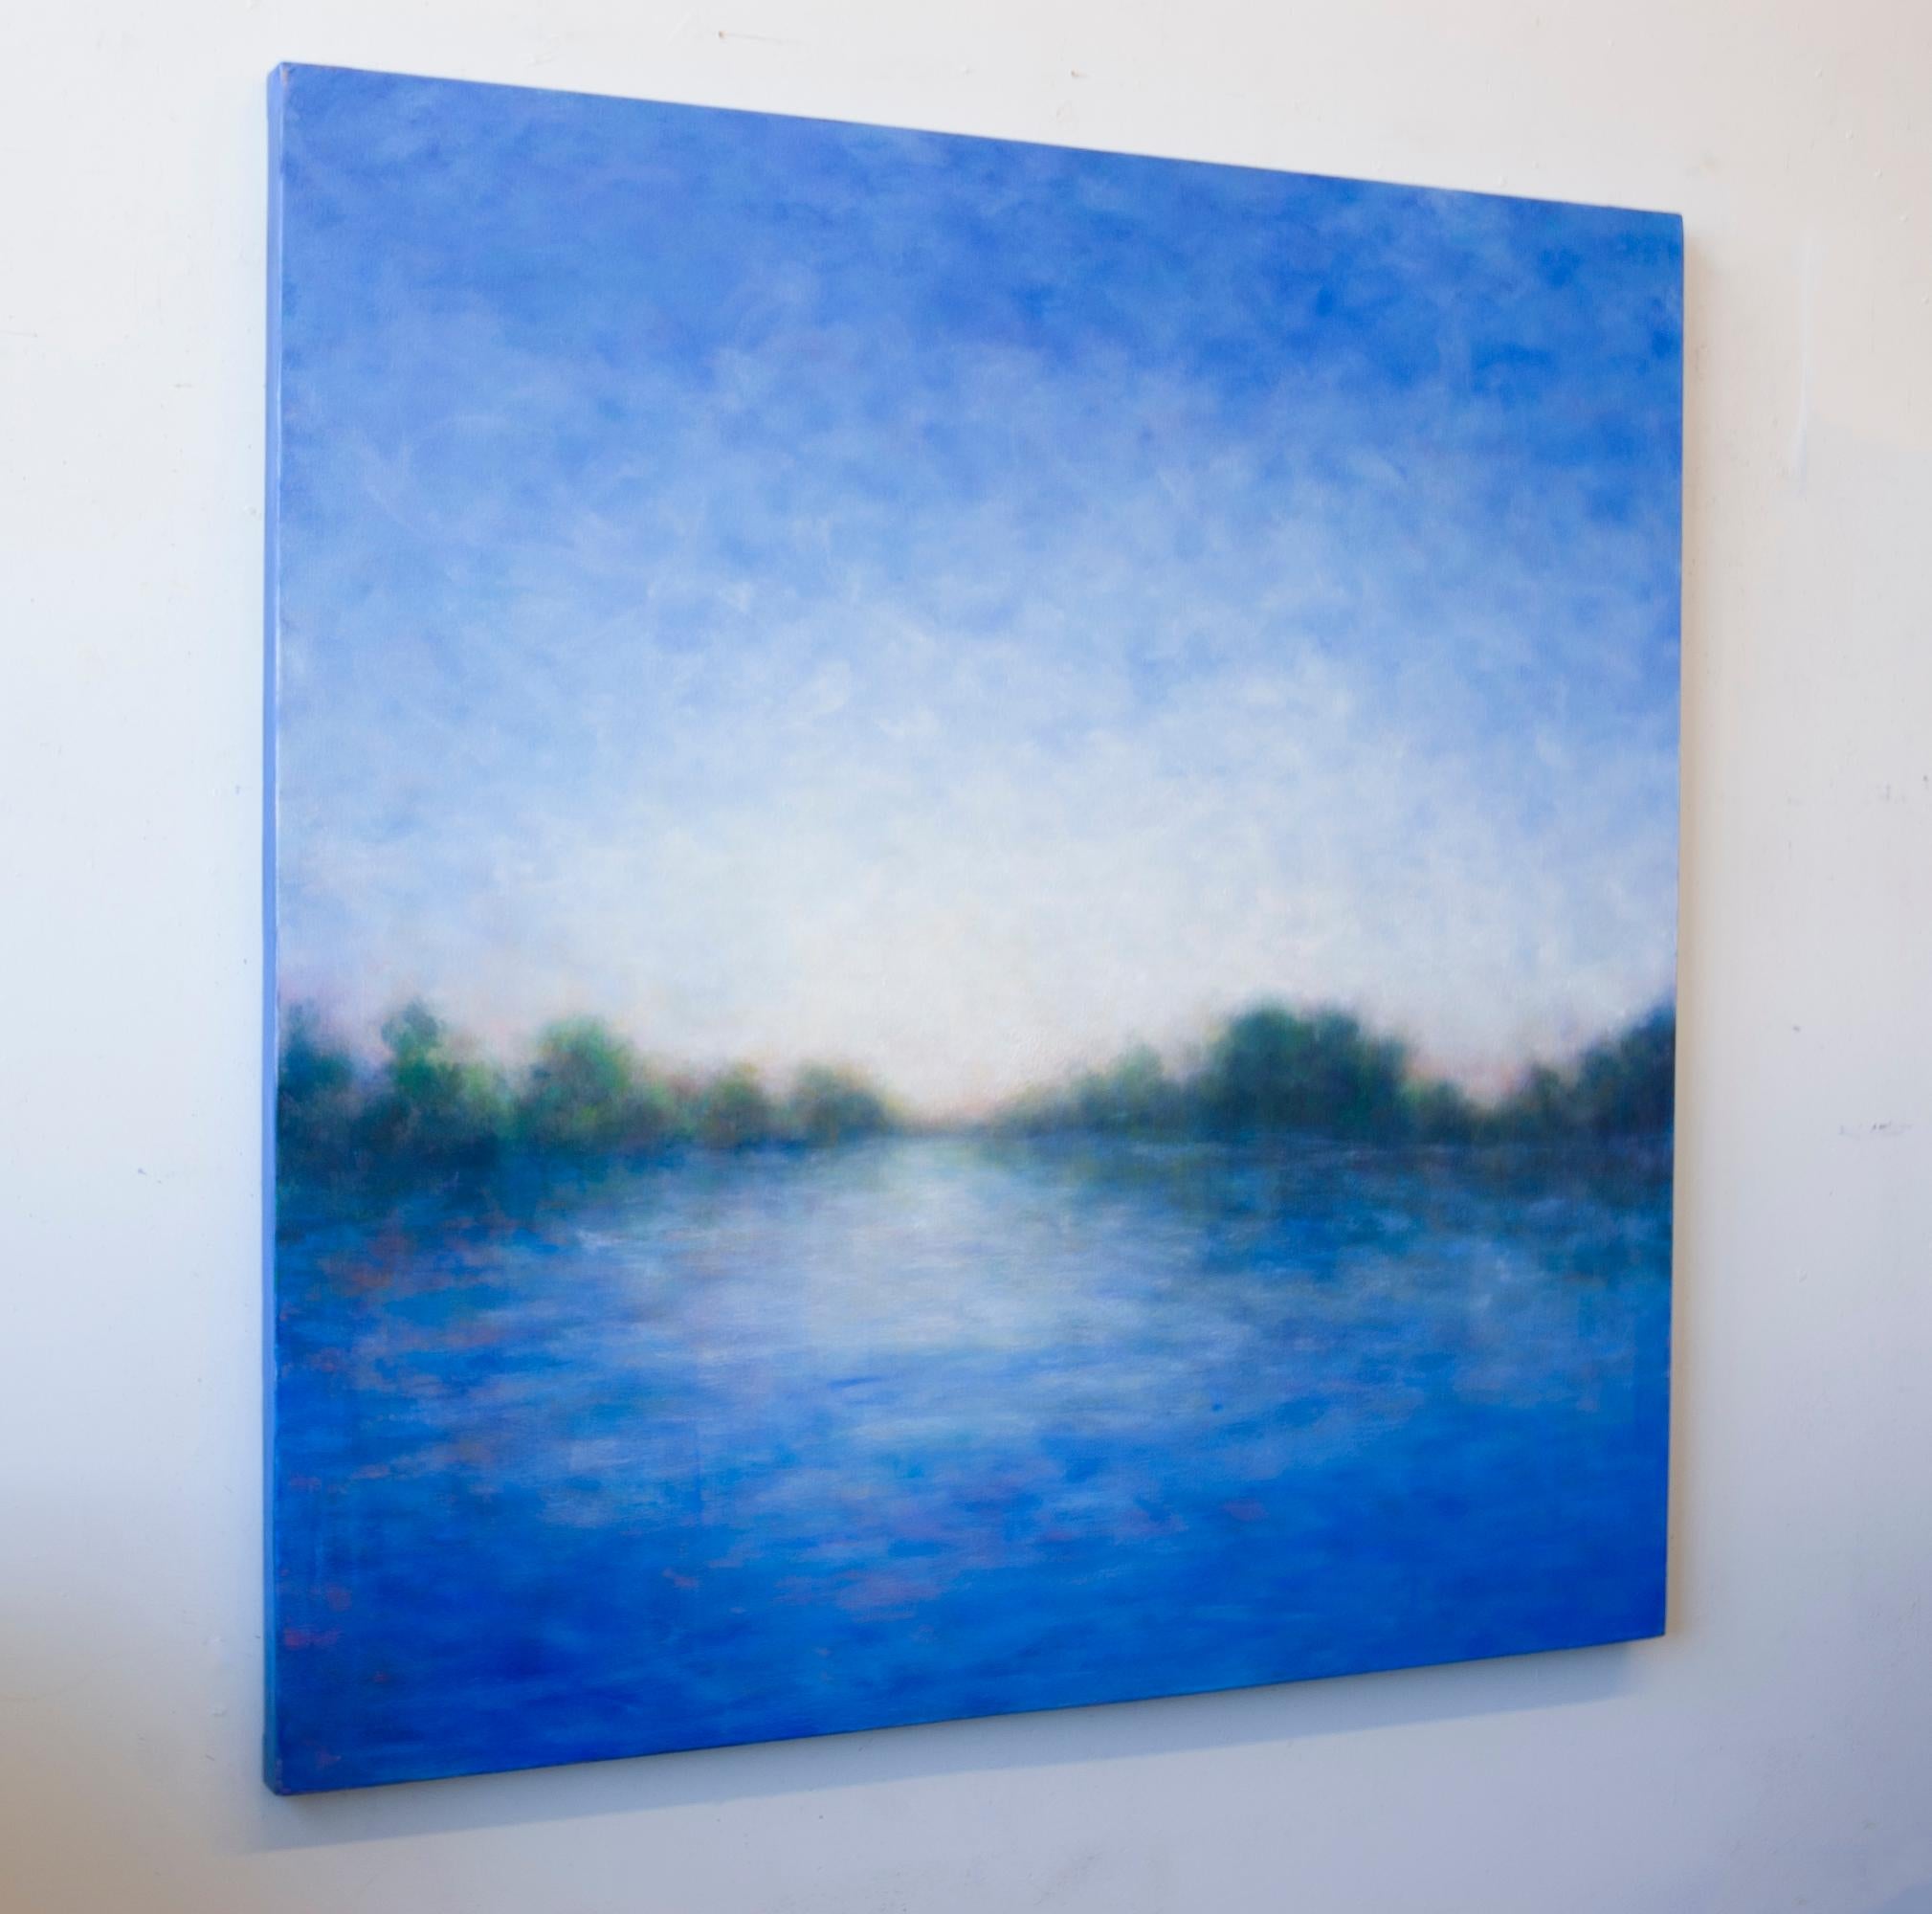 Rogue River Reflections - Abstract Impressionist Art by Victoria Veedell